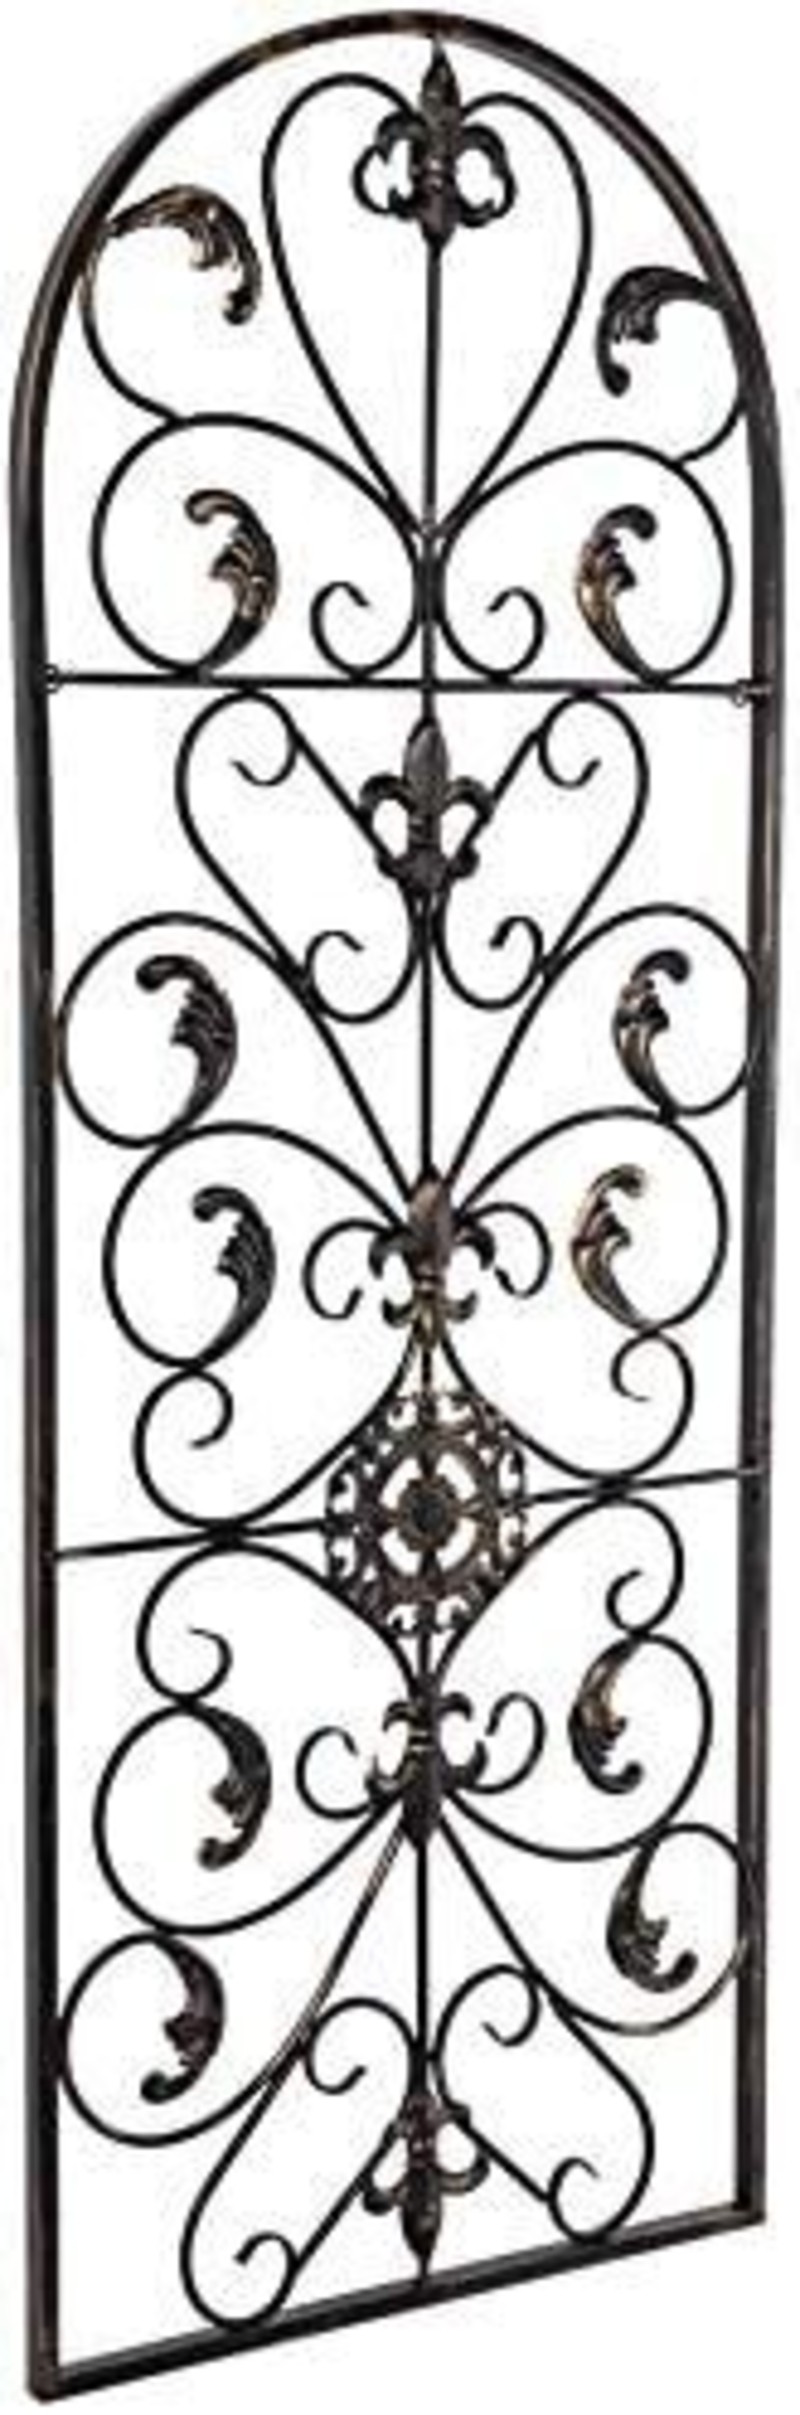 Vintage Wrought Iron Arched Wall Decor